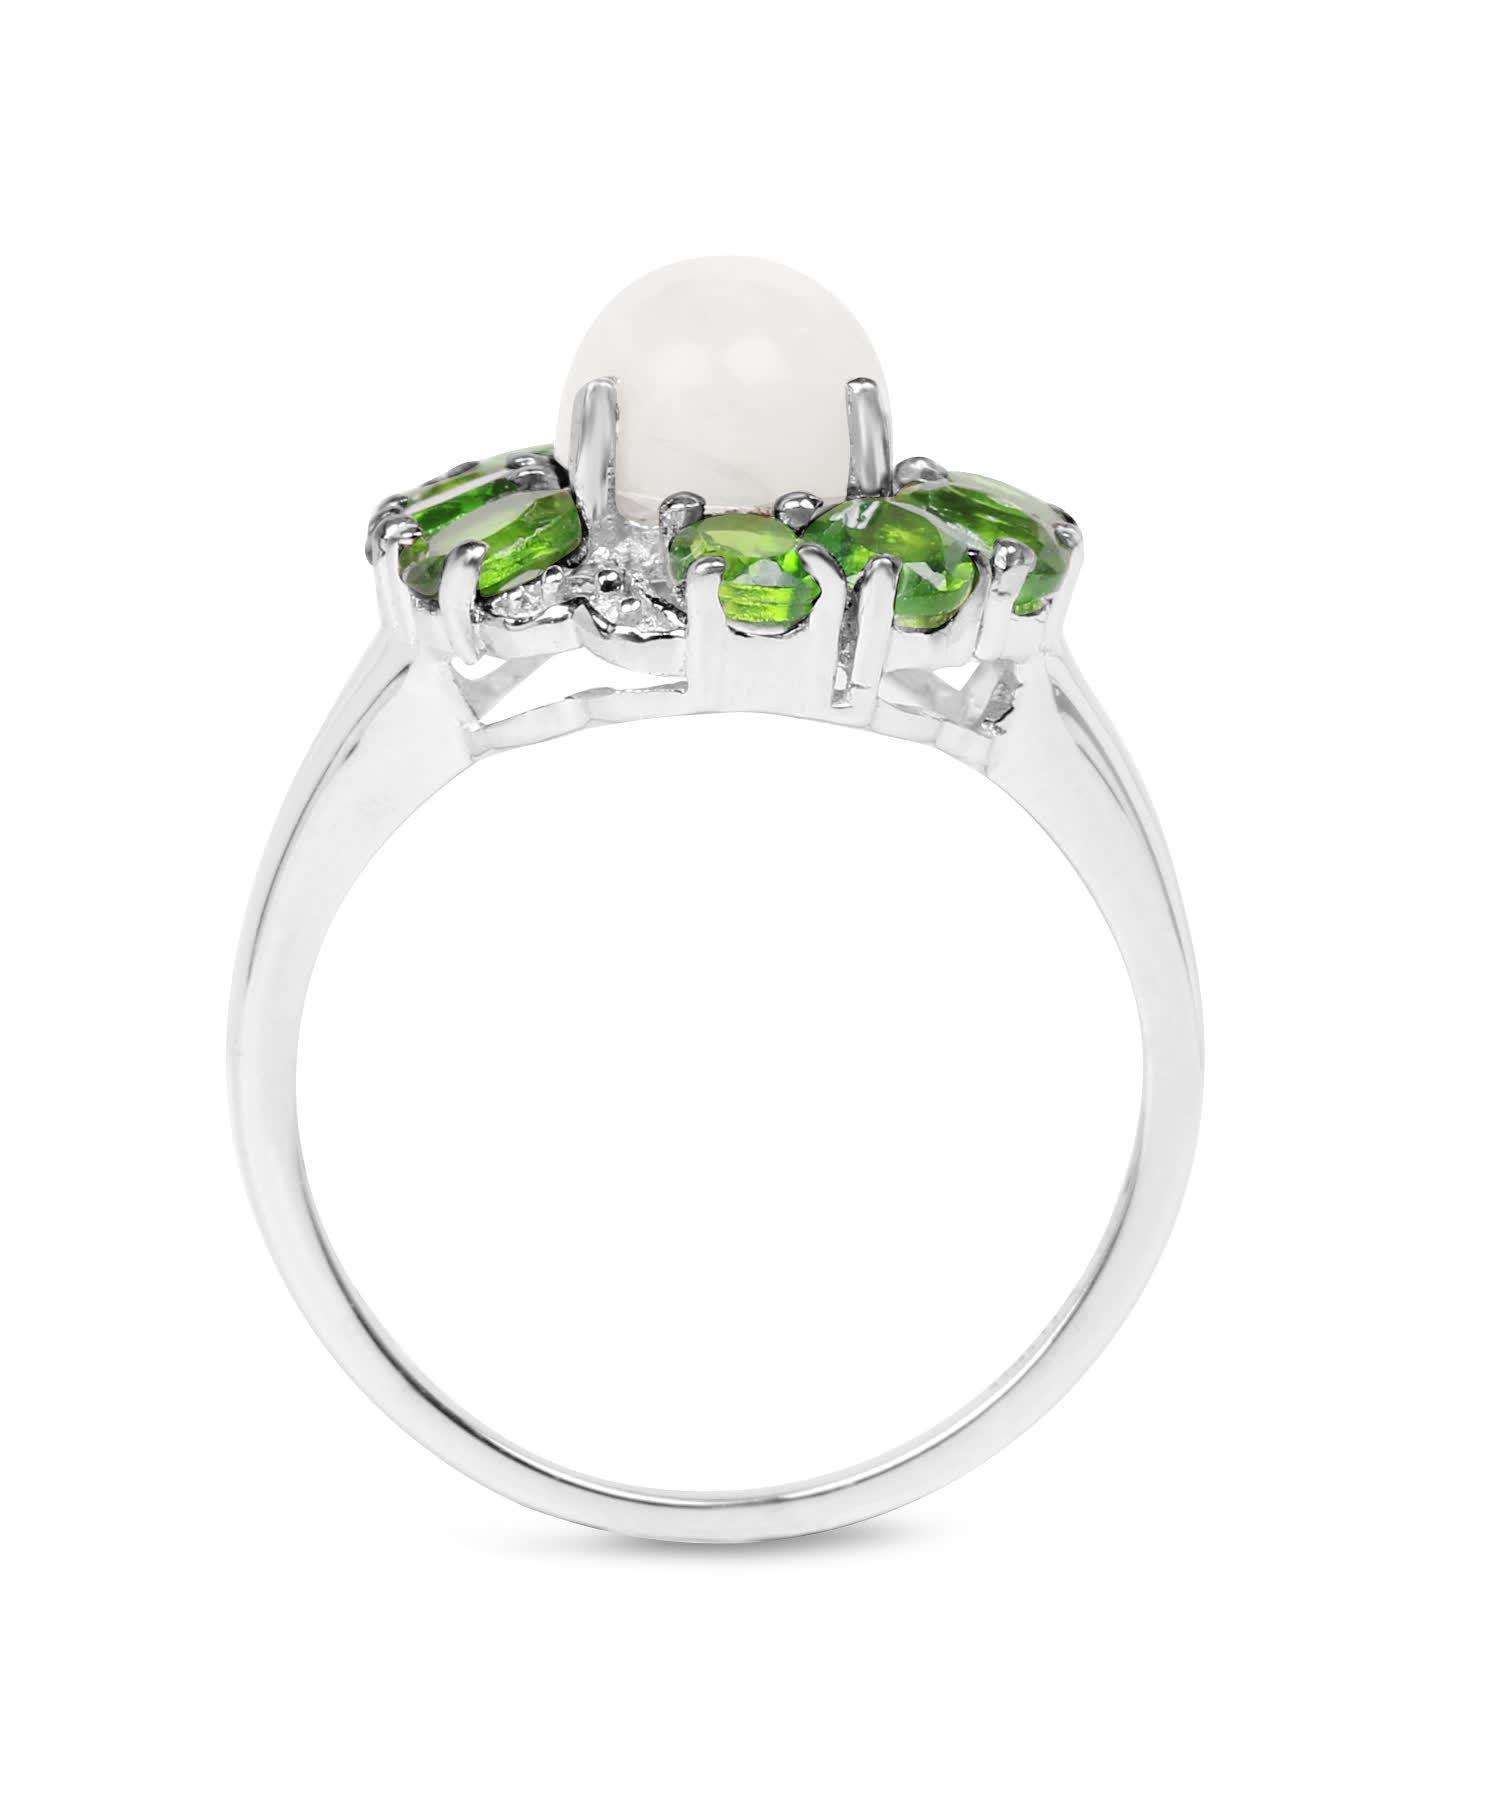 2.93ctw Natural Ethiopian Opal, Forest Green Chrome Diopside and Topaz Rhodium Plated 925 Sterling Silver Ring View 2